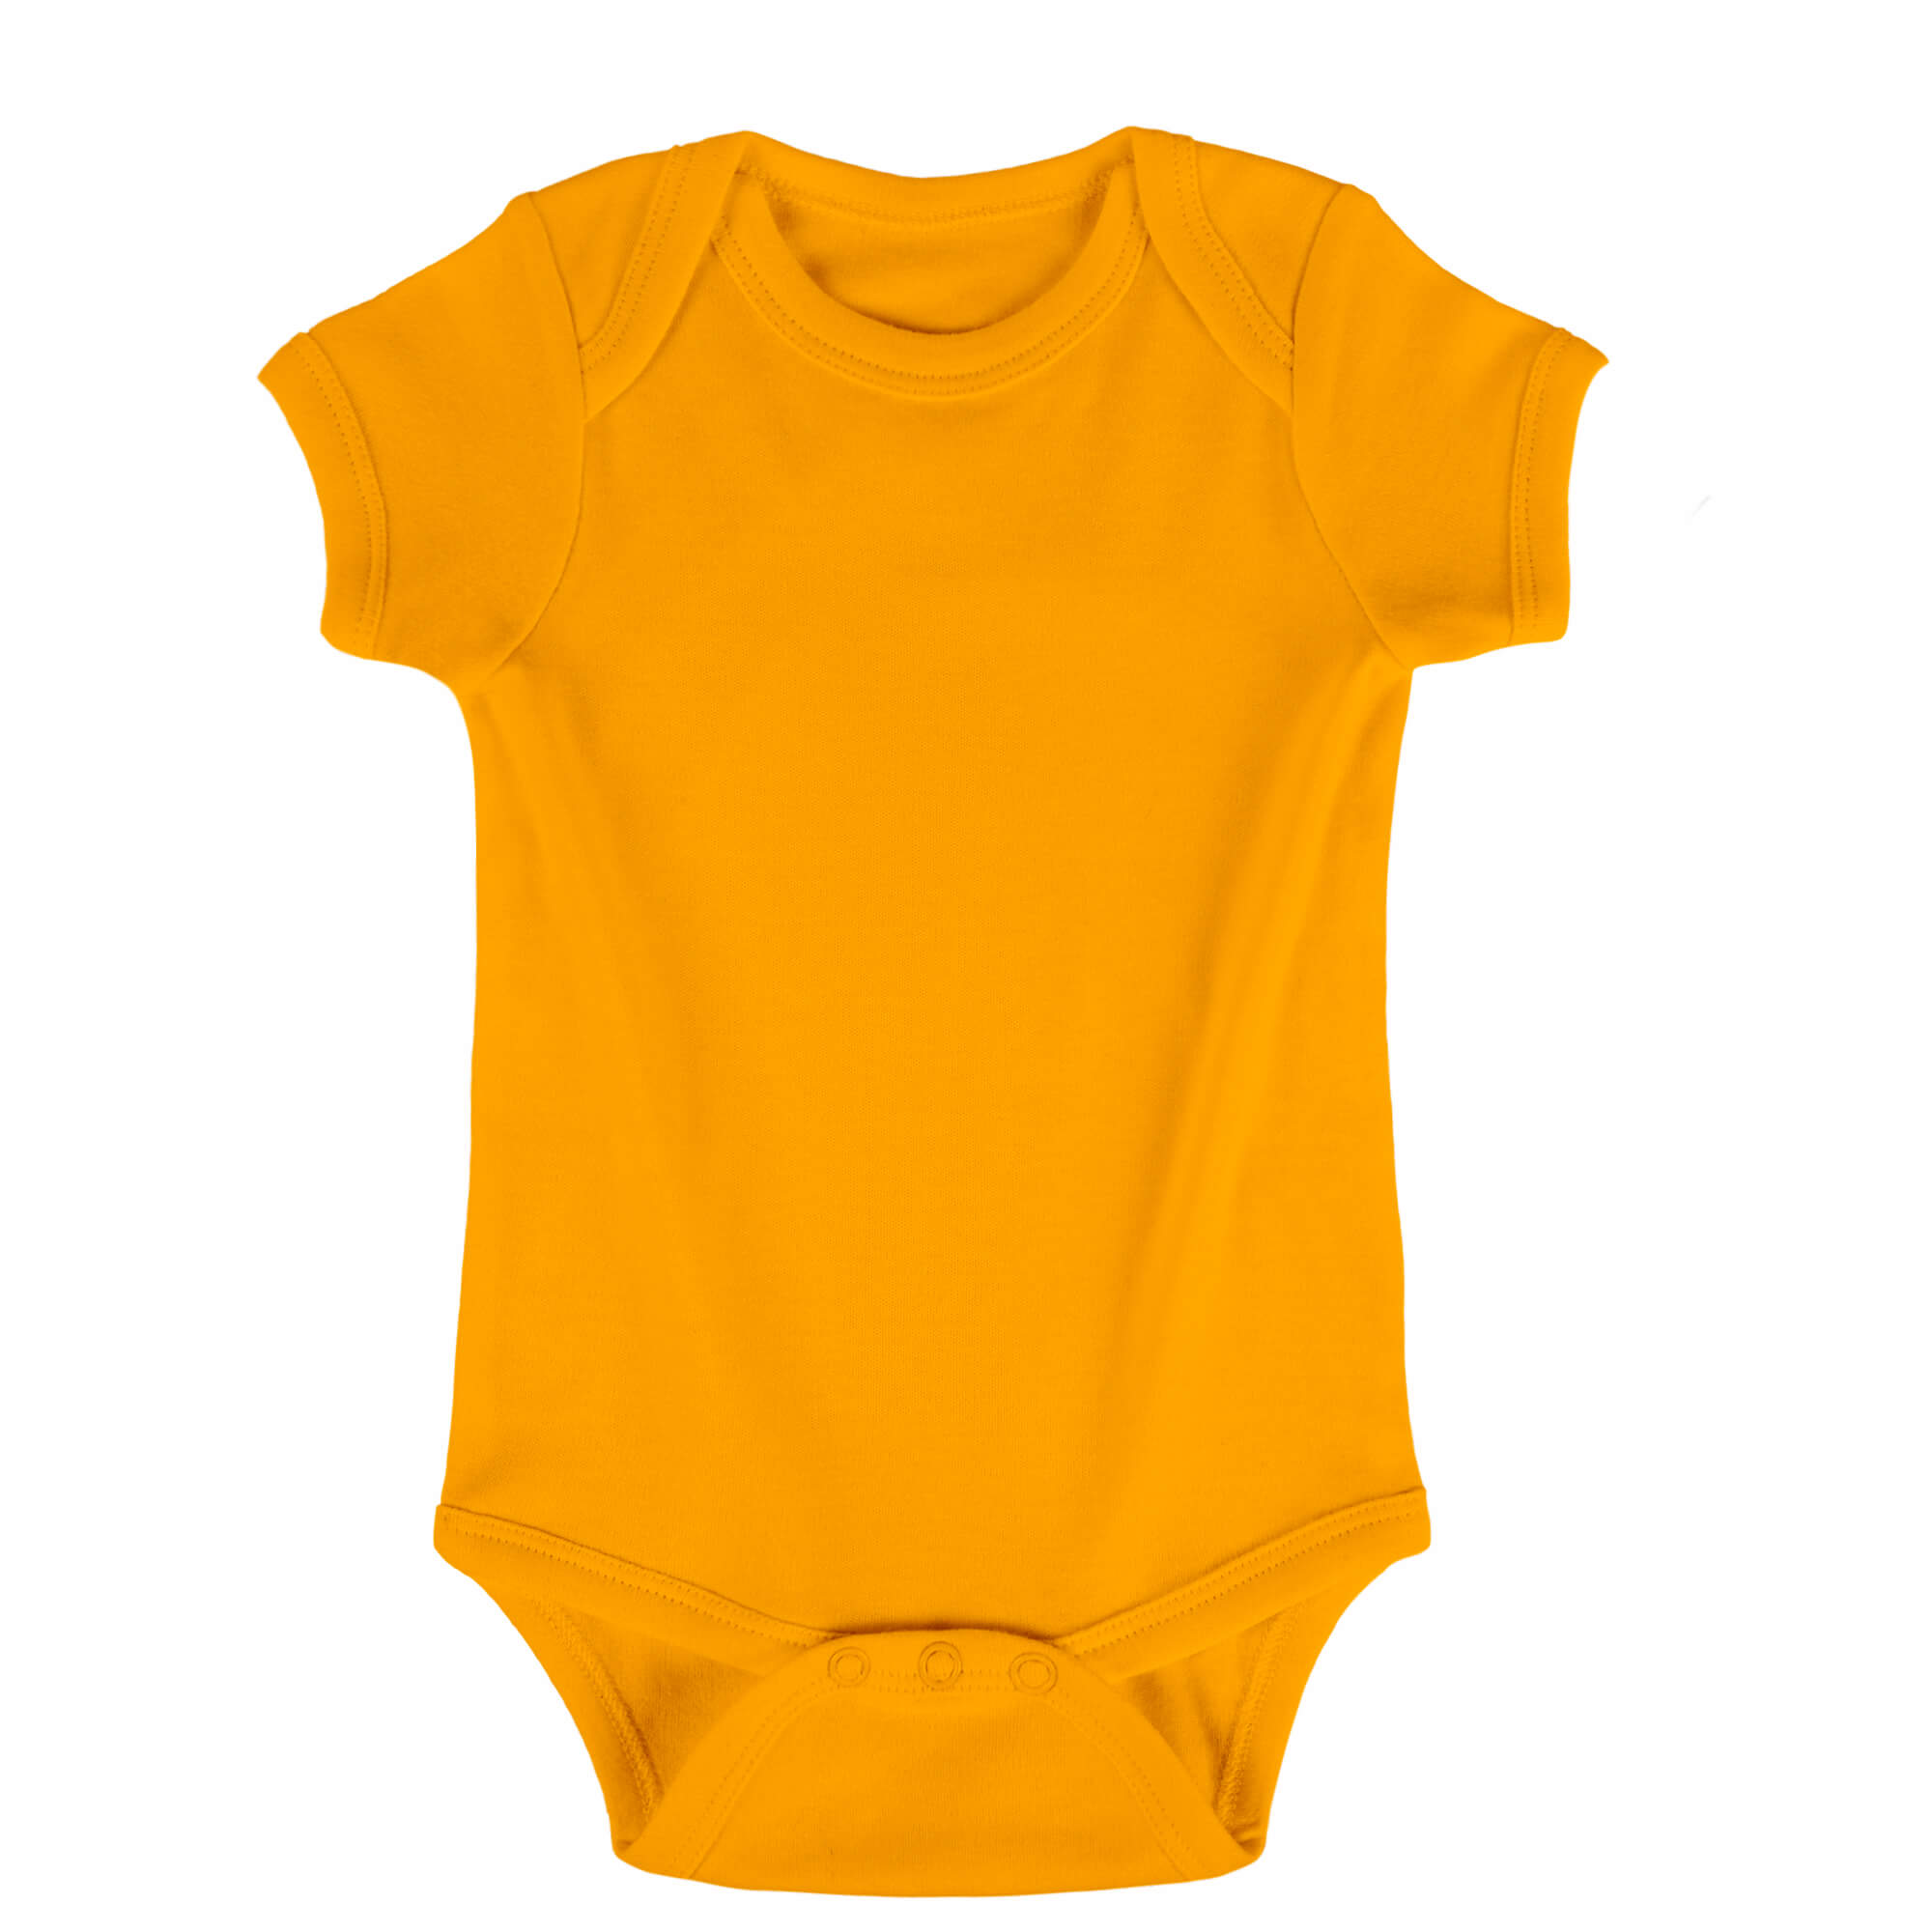 deep yellow color number #3, onesie color selection, and color display.